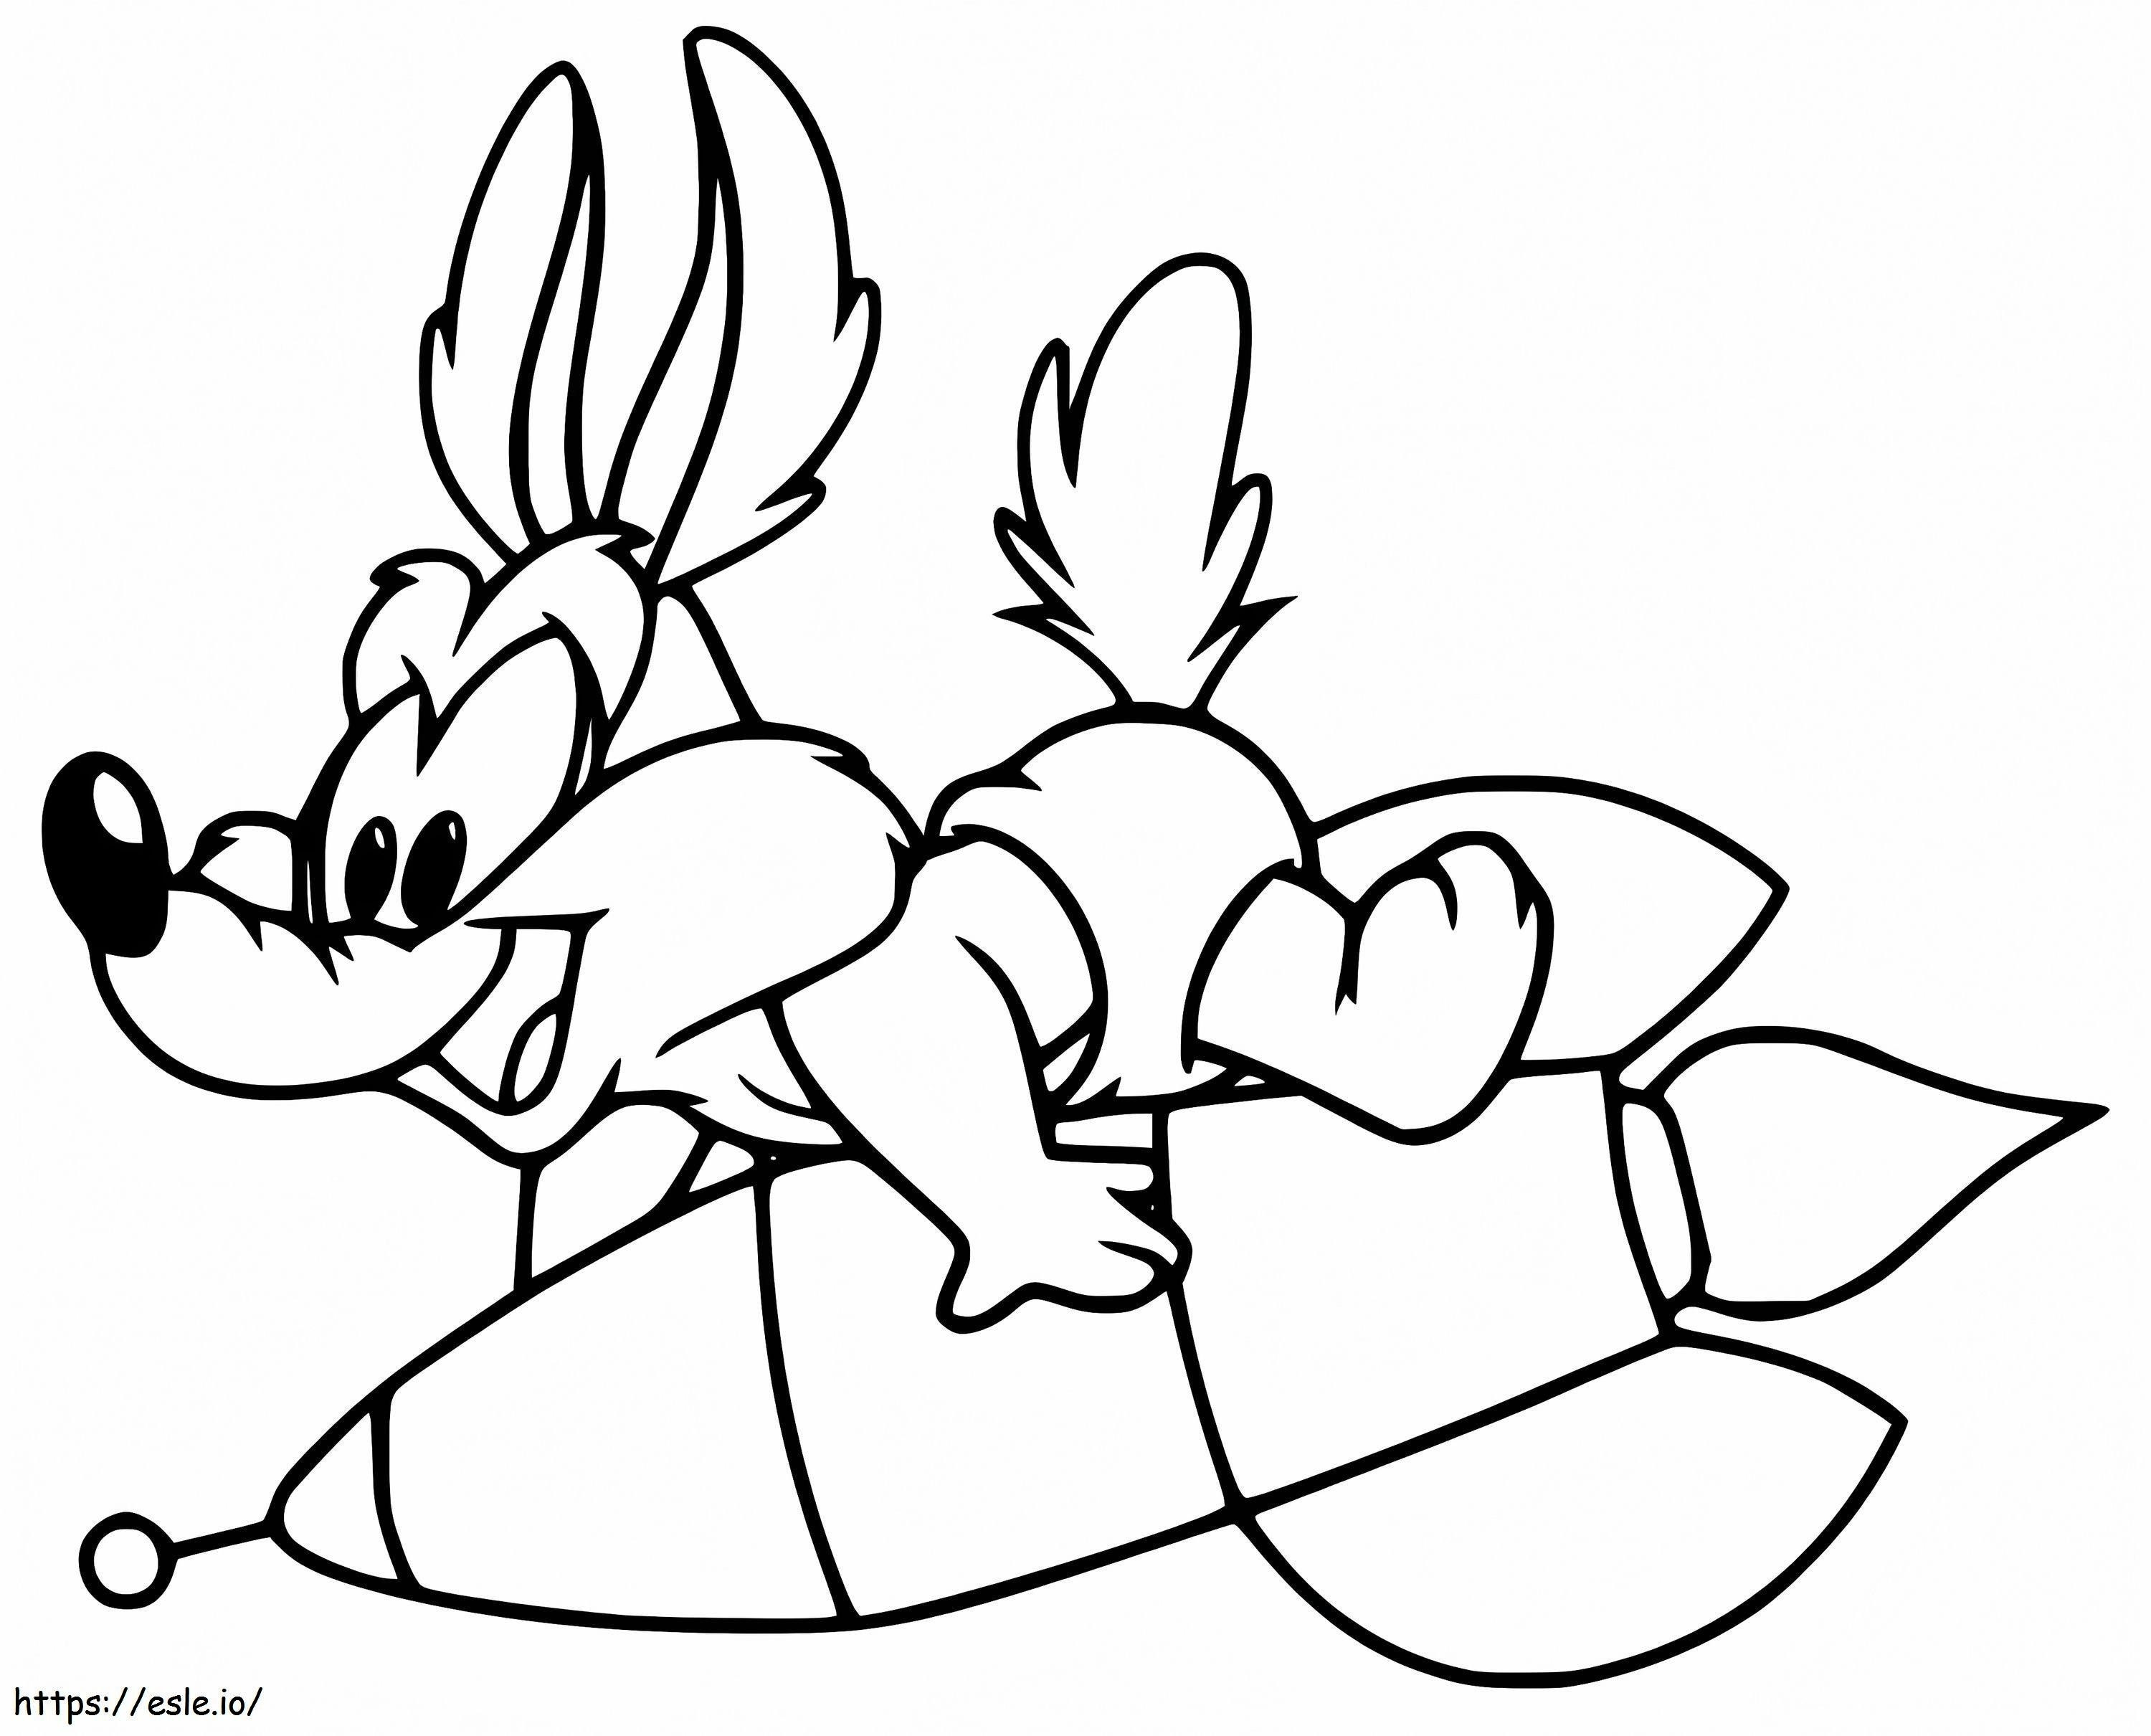 Baby Wile E Coyote coloring page